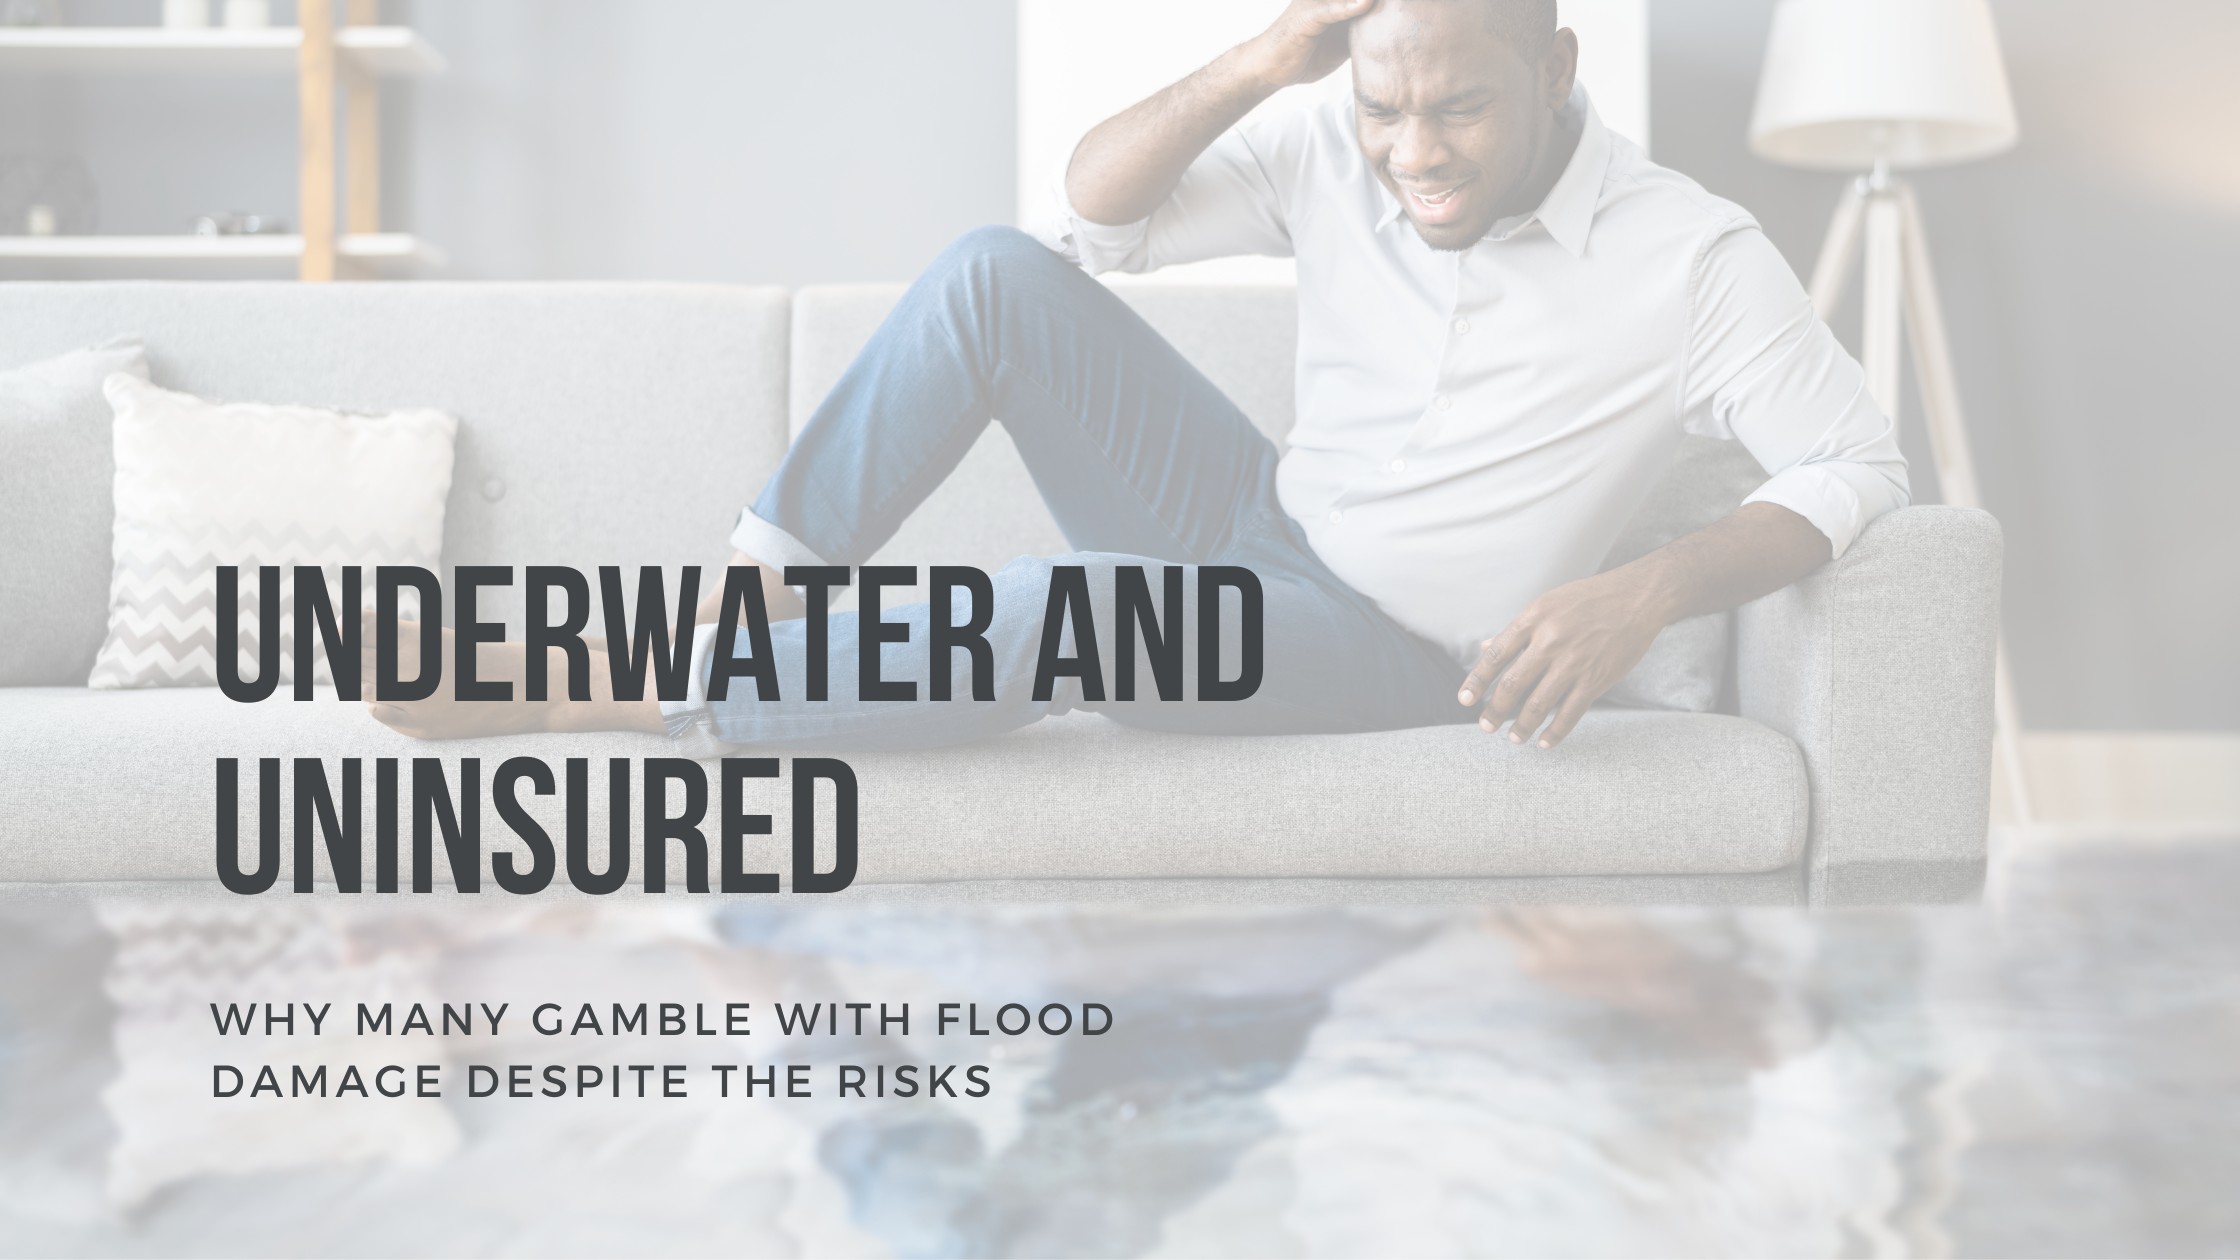 Underwater and Uninsured: Why Many Gamble with Flood Damage Despite the Risks